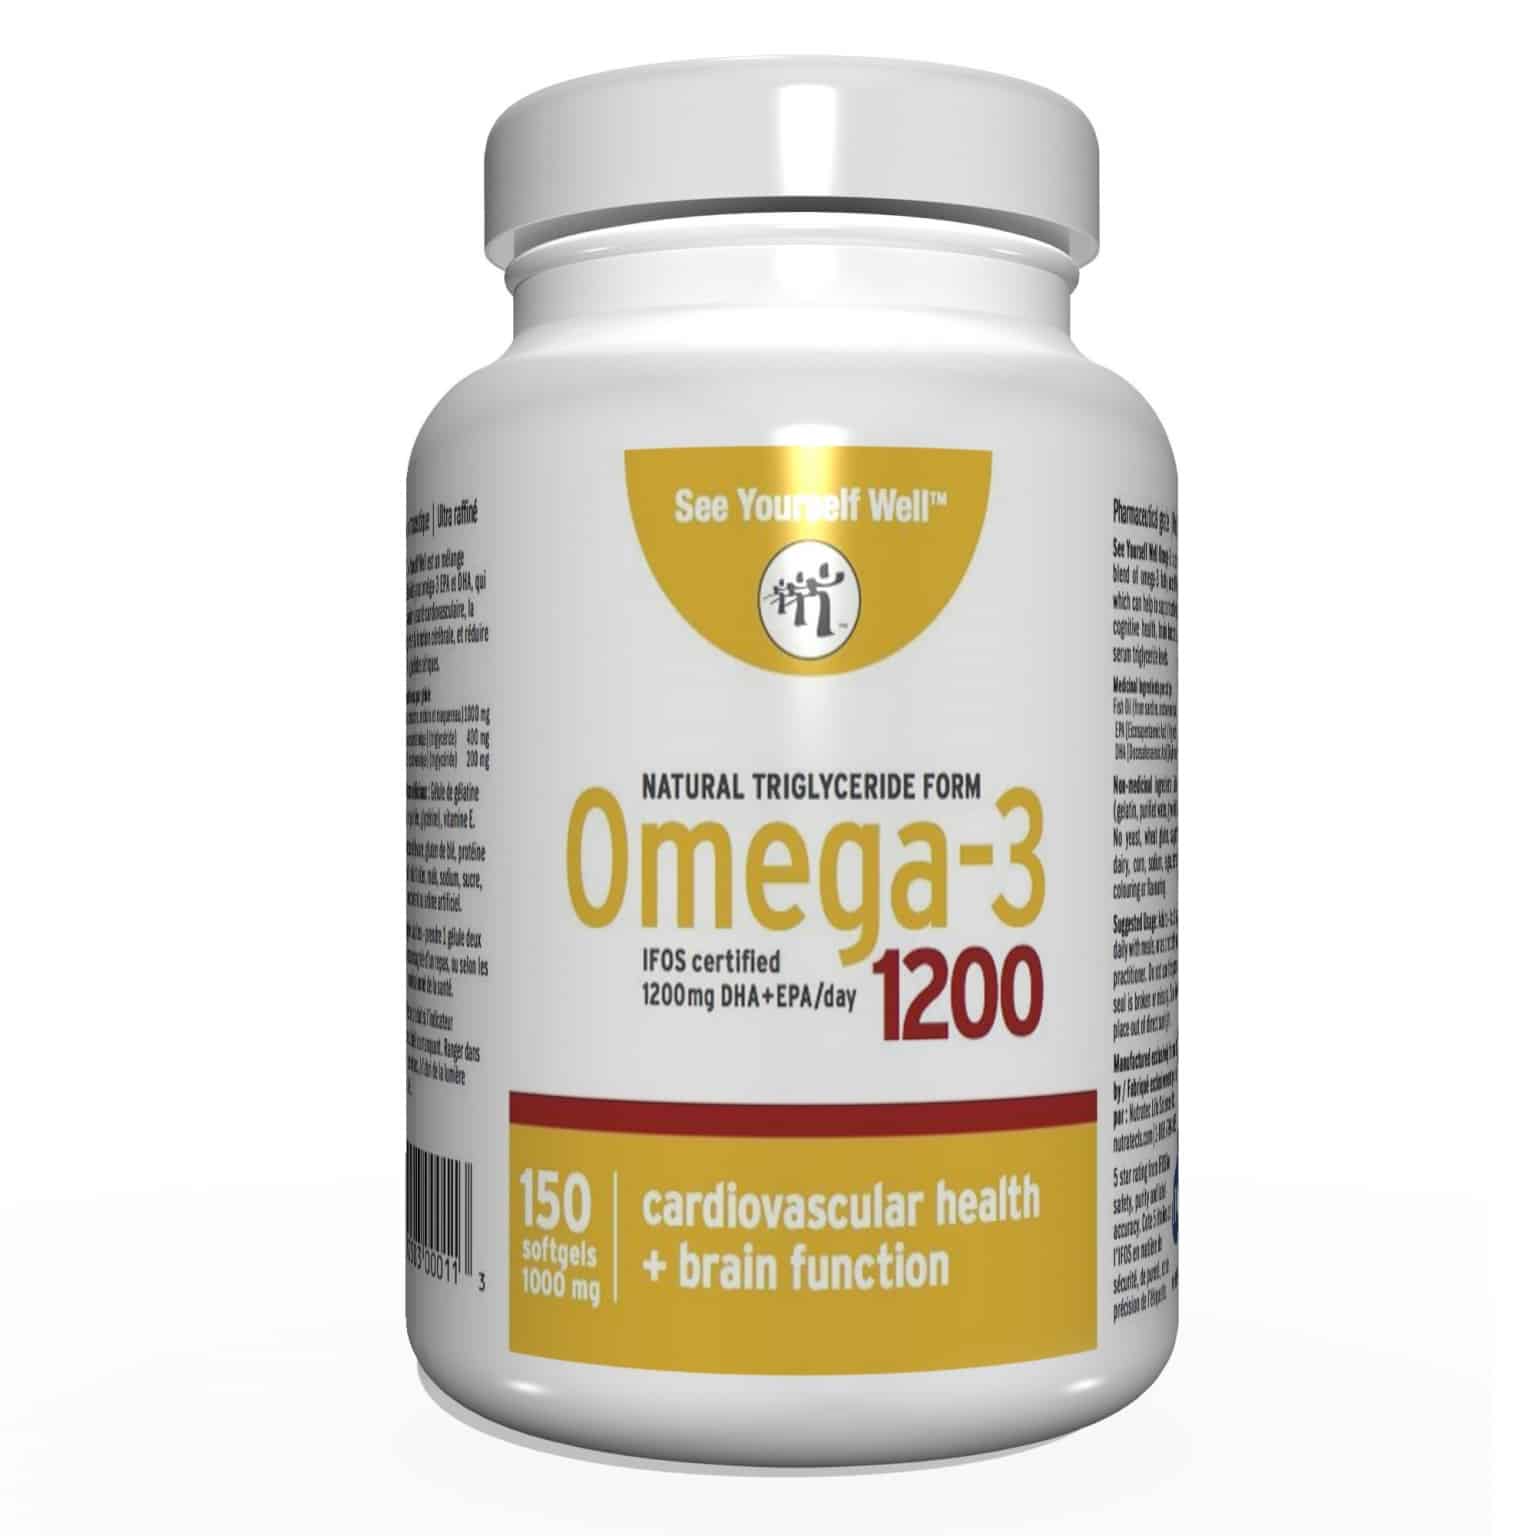 See Yourself Well Natural Triglyceride Form Omega 3 Fish Oil Softgels ...